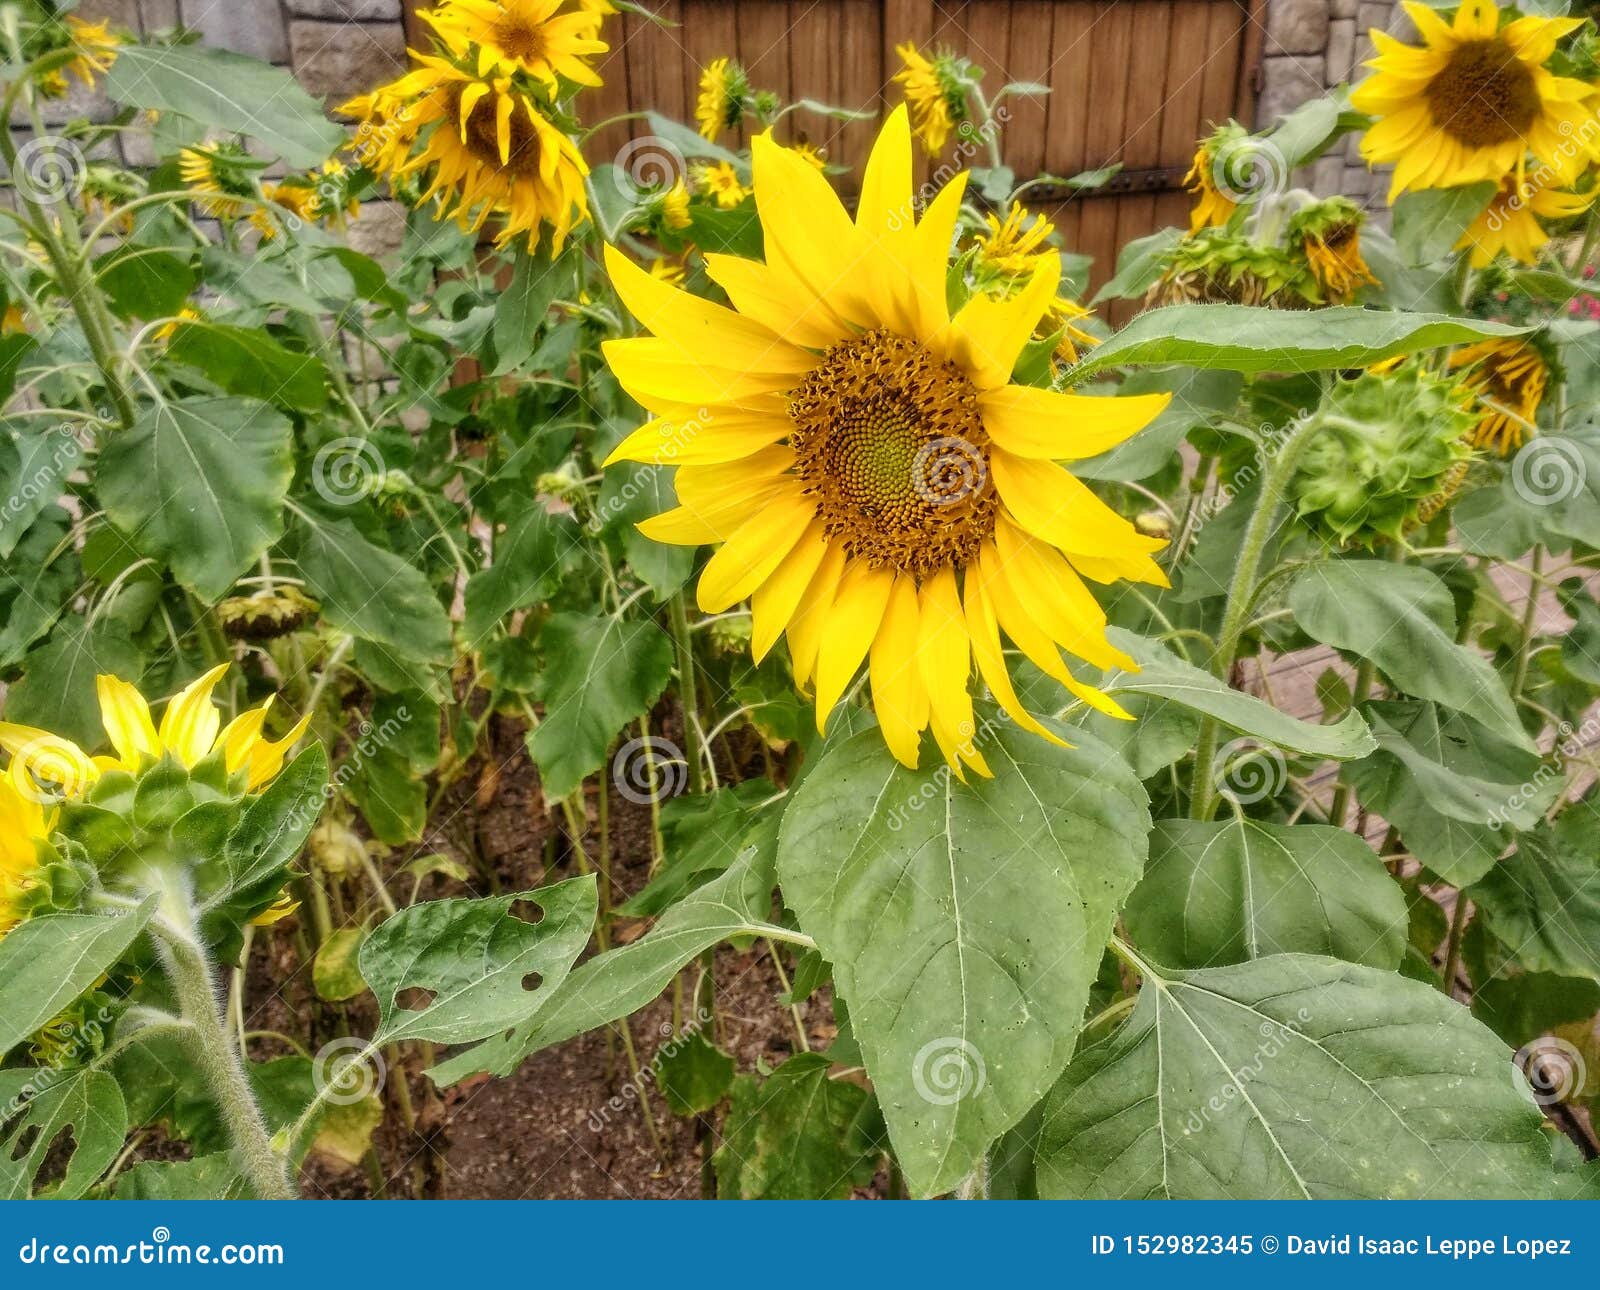 Beautiful Sunflower Surrounded by More Sunflowers Stock Image - Image ...